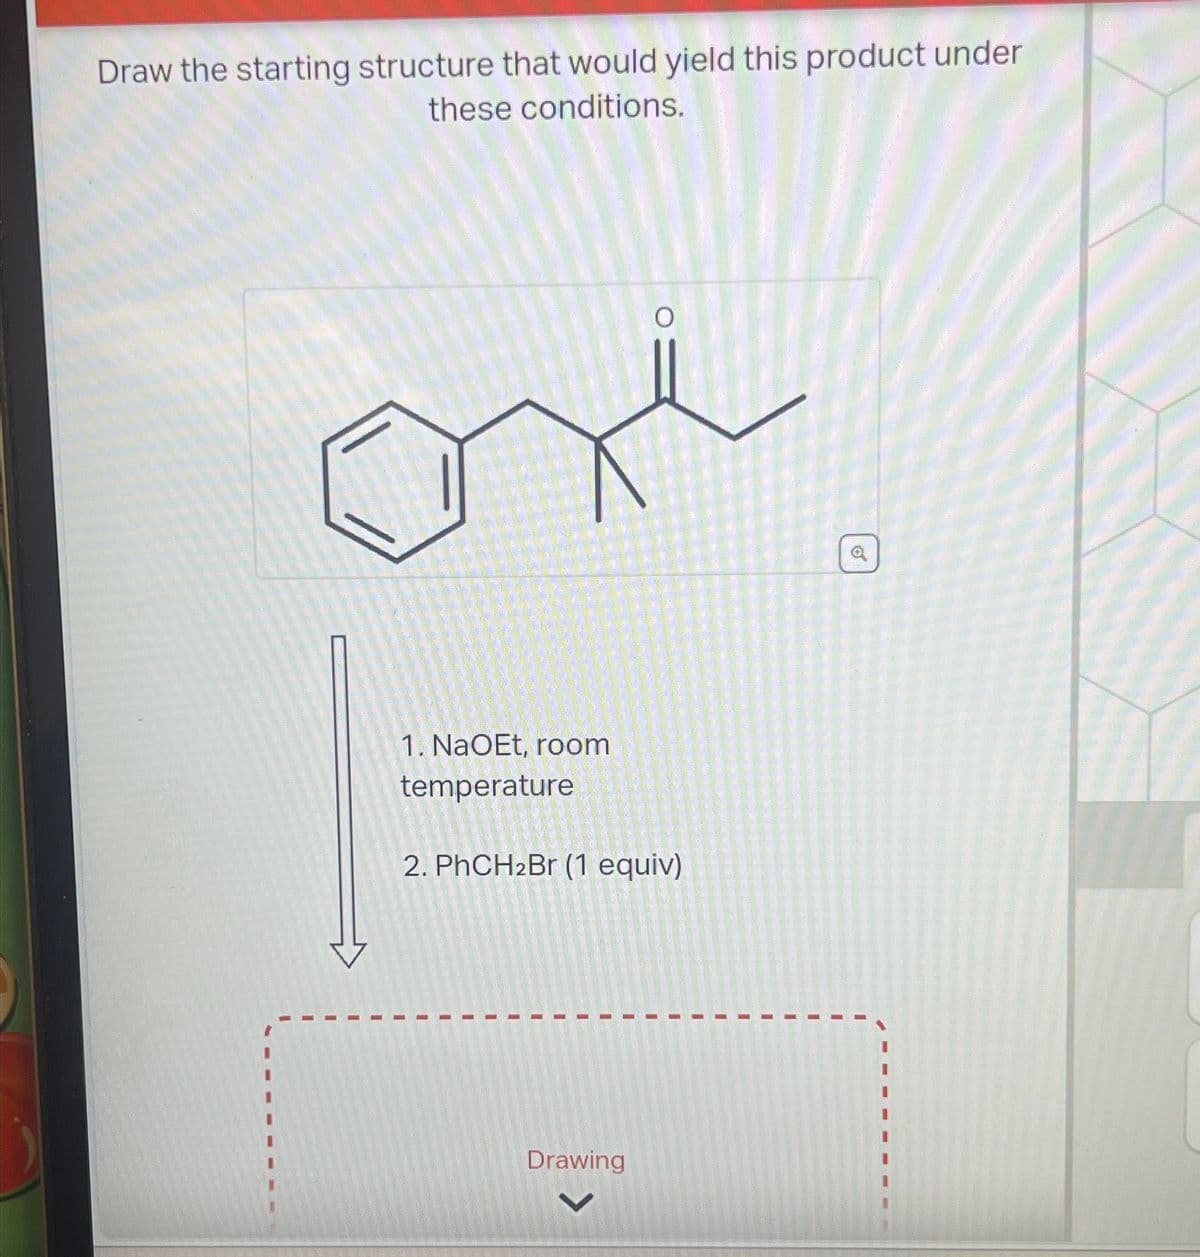 Draw the starting structure that would yield this product under
these conditions.
1. NaOEt, room
temperature
2. PhCH2Br (1 equiv)
I
"
I
4
L
L
I
I
Drawing
o